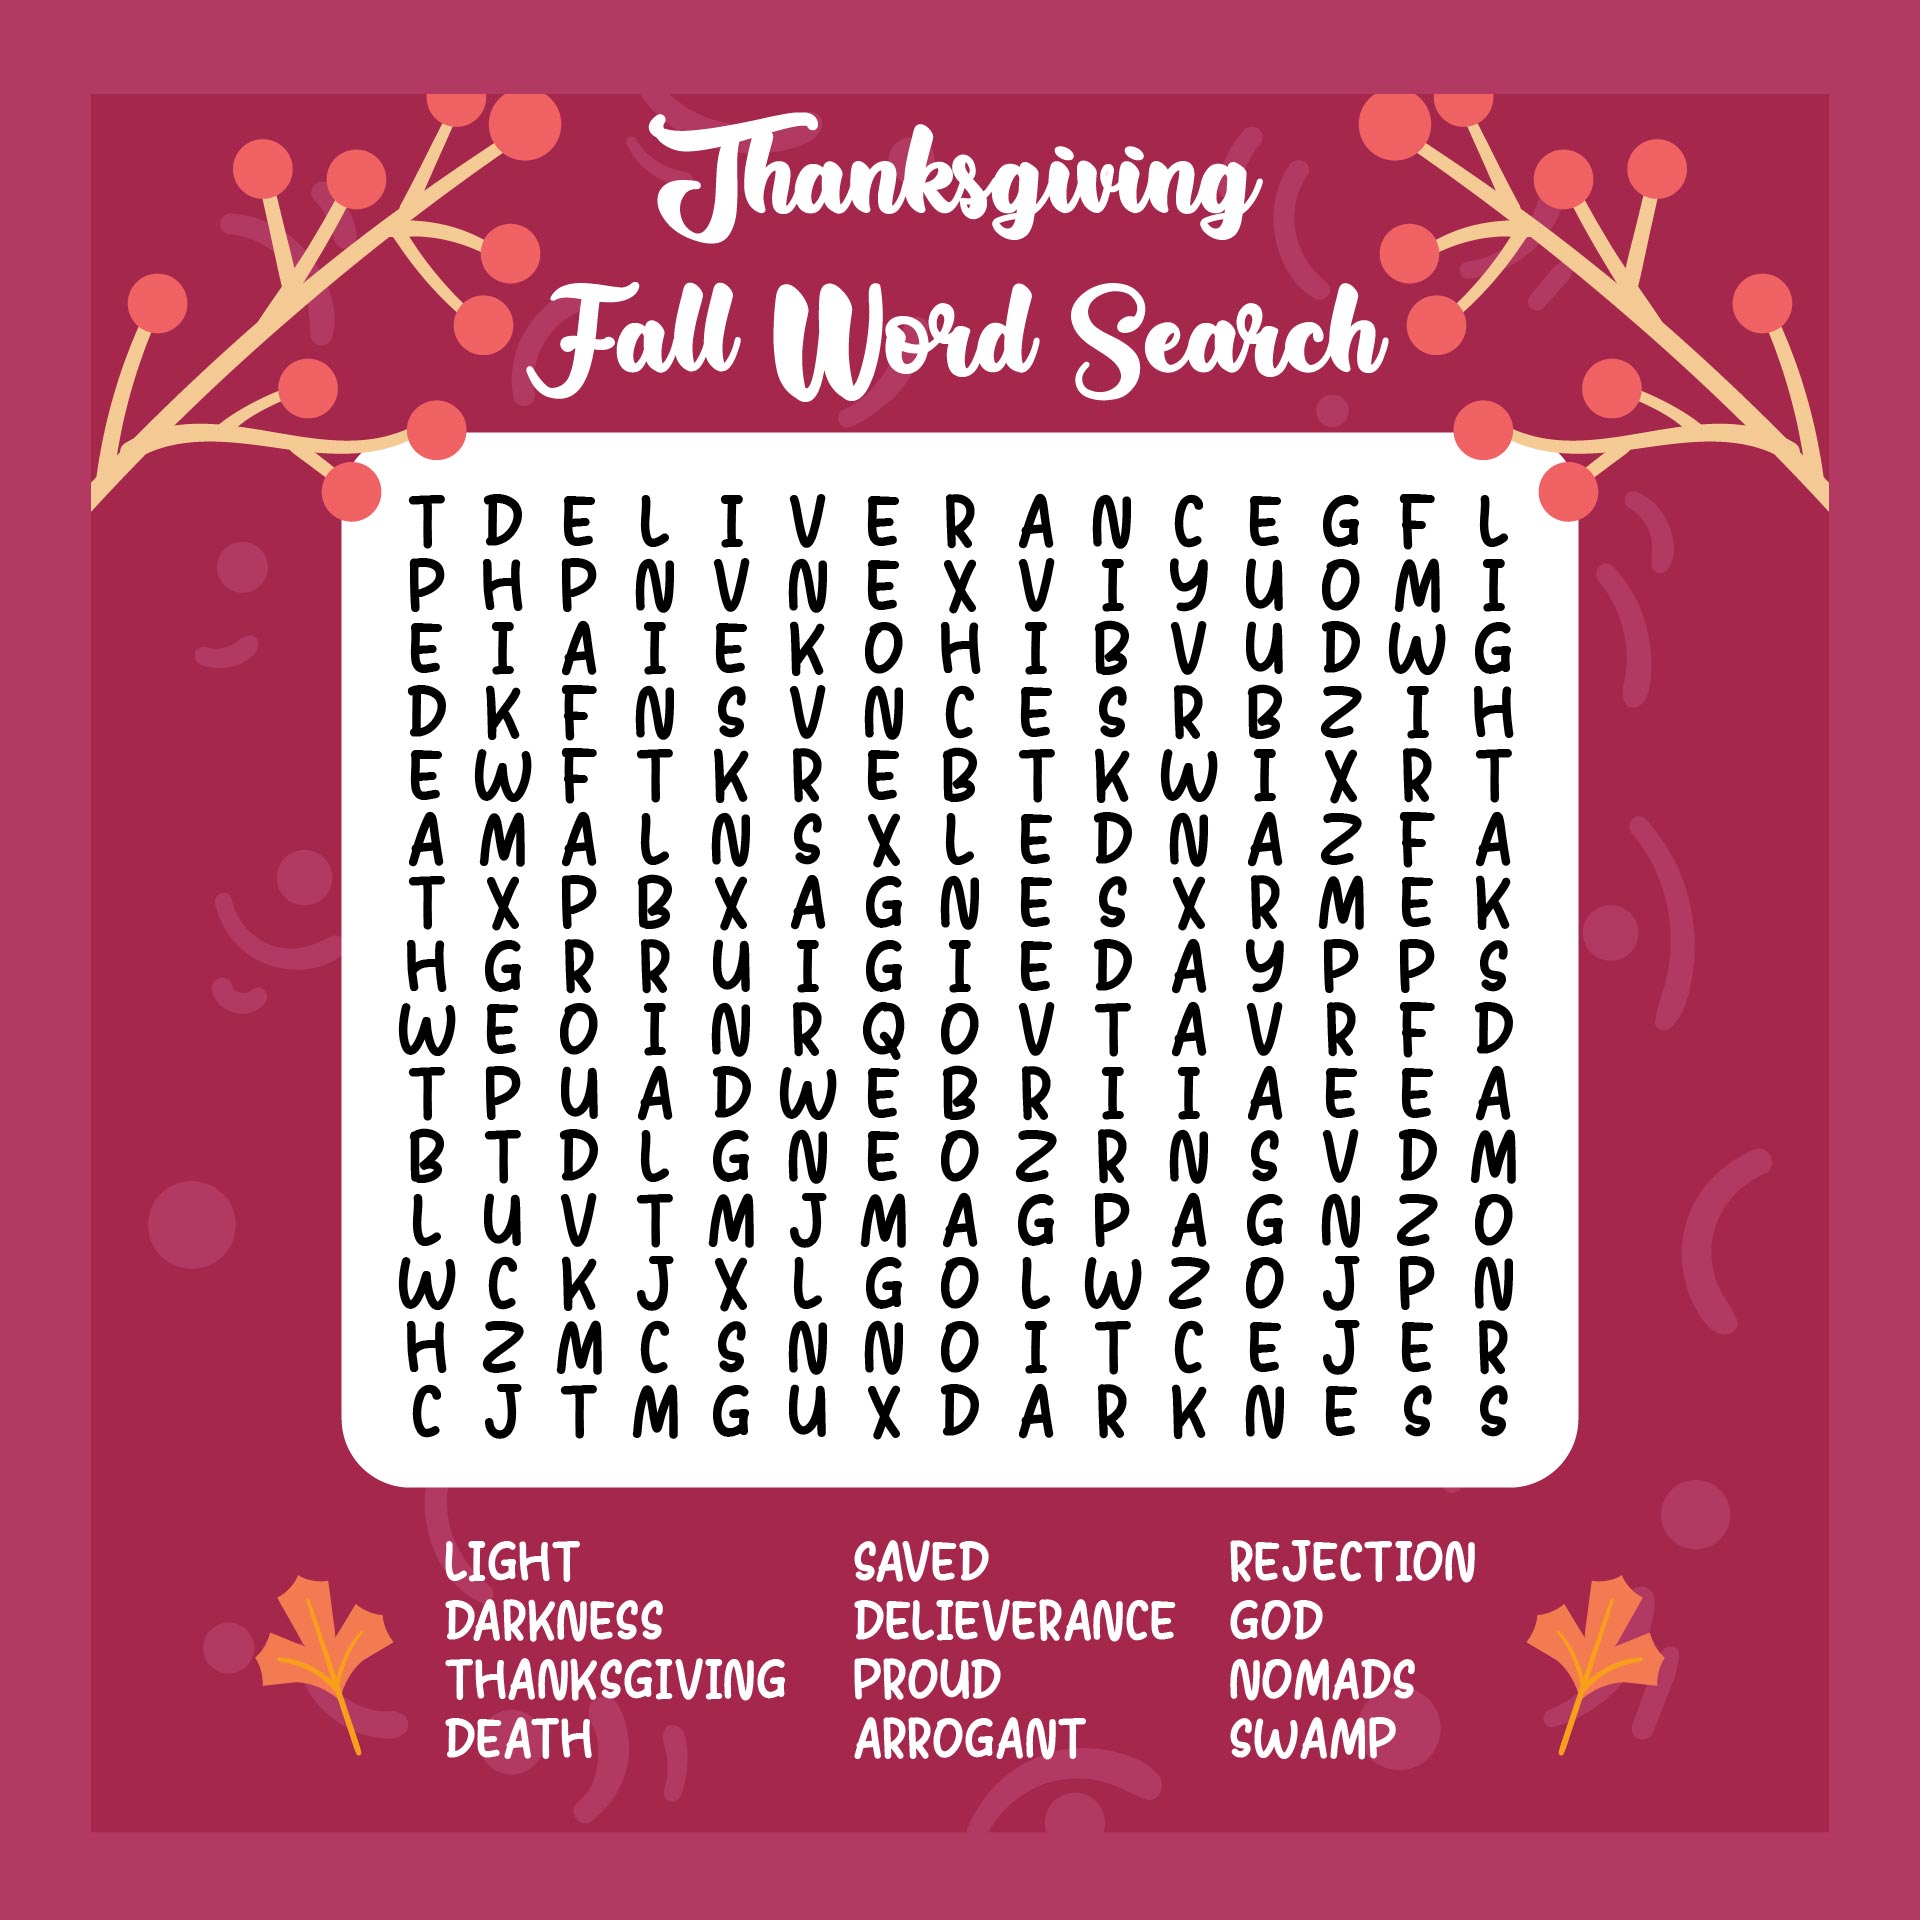 Printable Fall & Thanksgiving Word Search